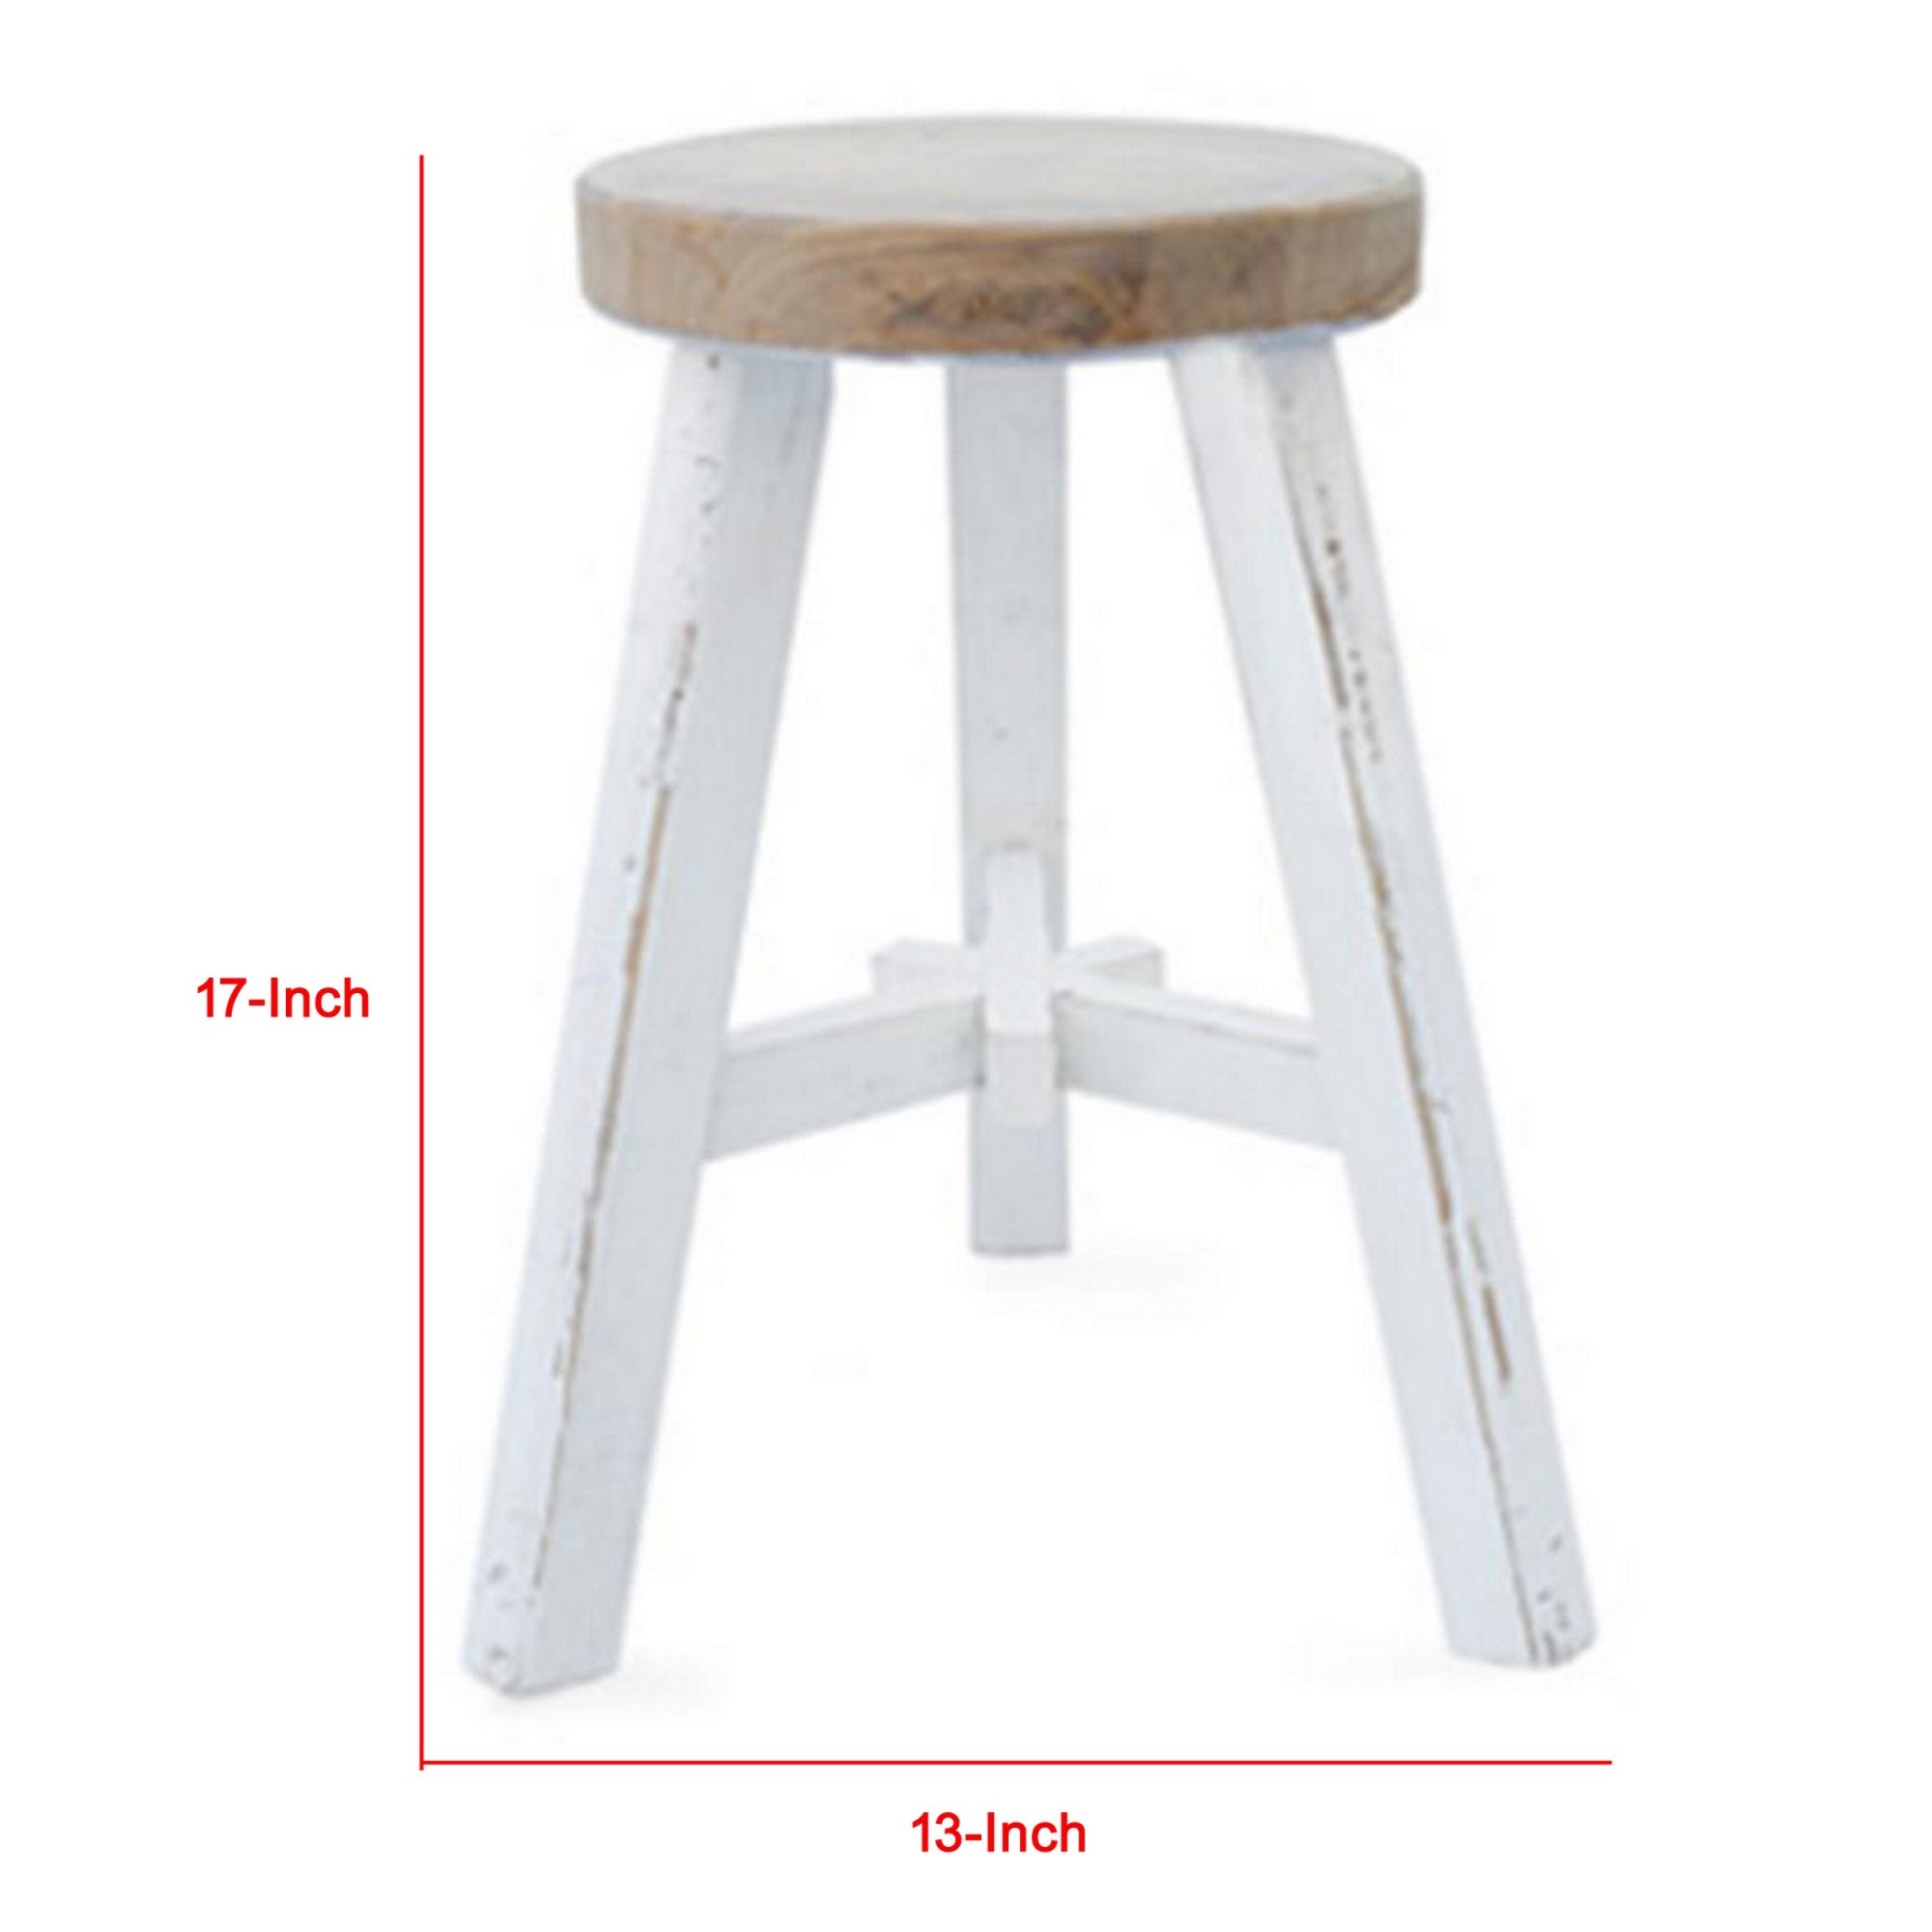 Benjara 17 Inch Accent Stool, Round Brown Seat, Hand Painted White Tripod Legs